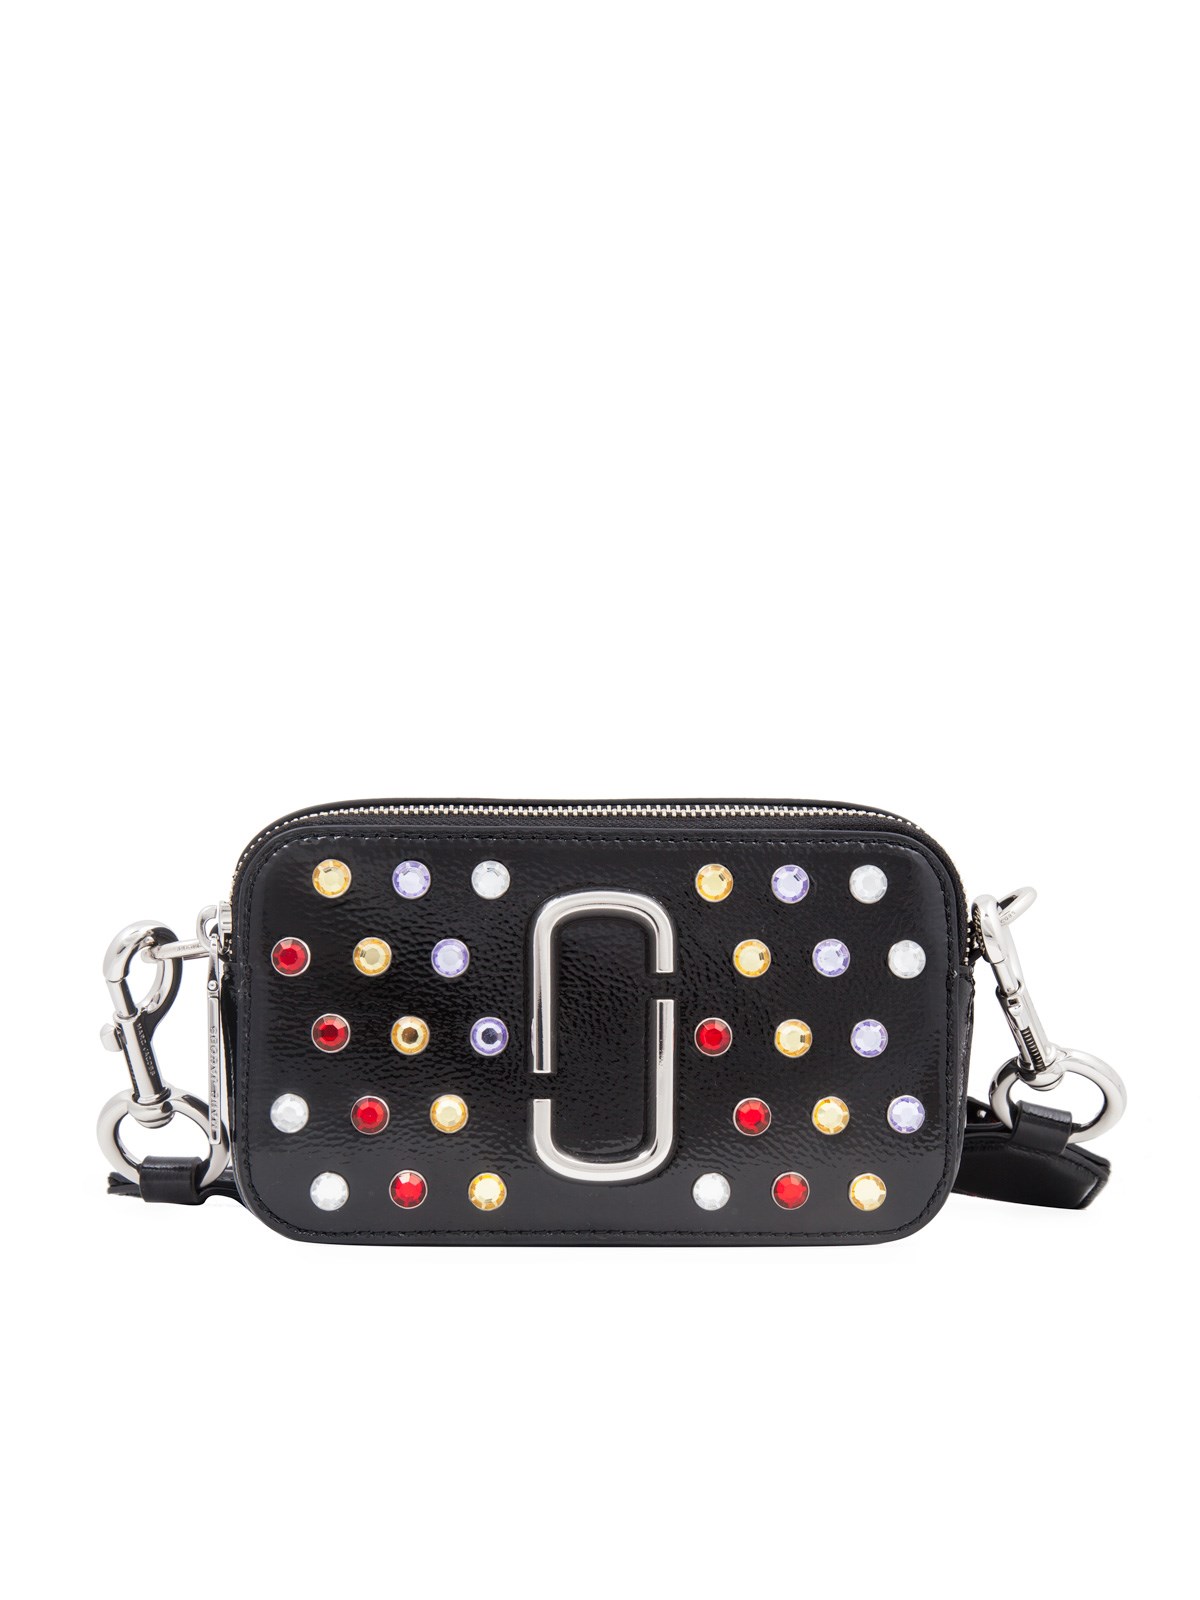 marc jacobs CRYSTALS SNAPSHOT CAMERA BAG available on montiboutique.com ...